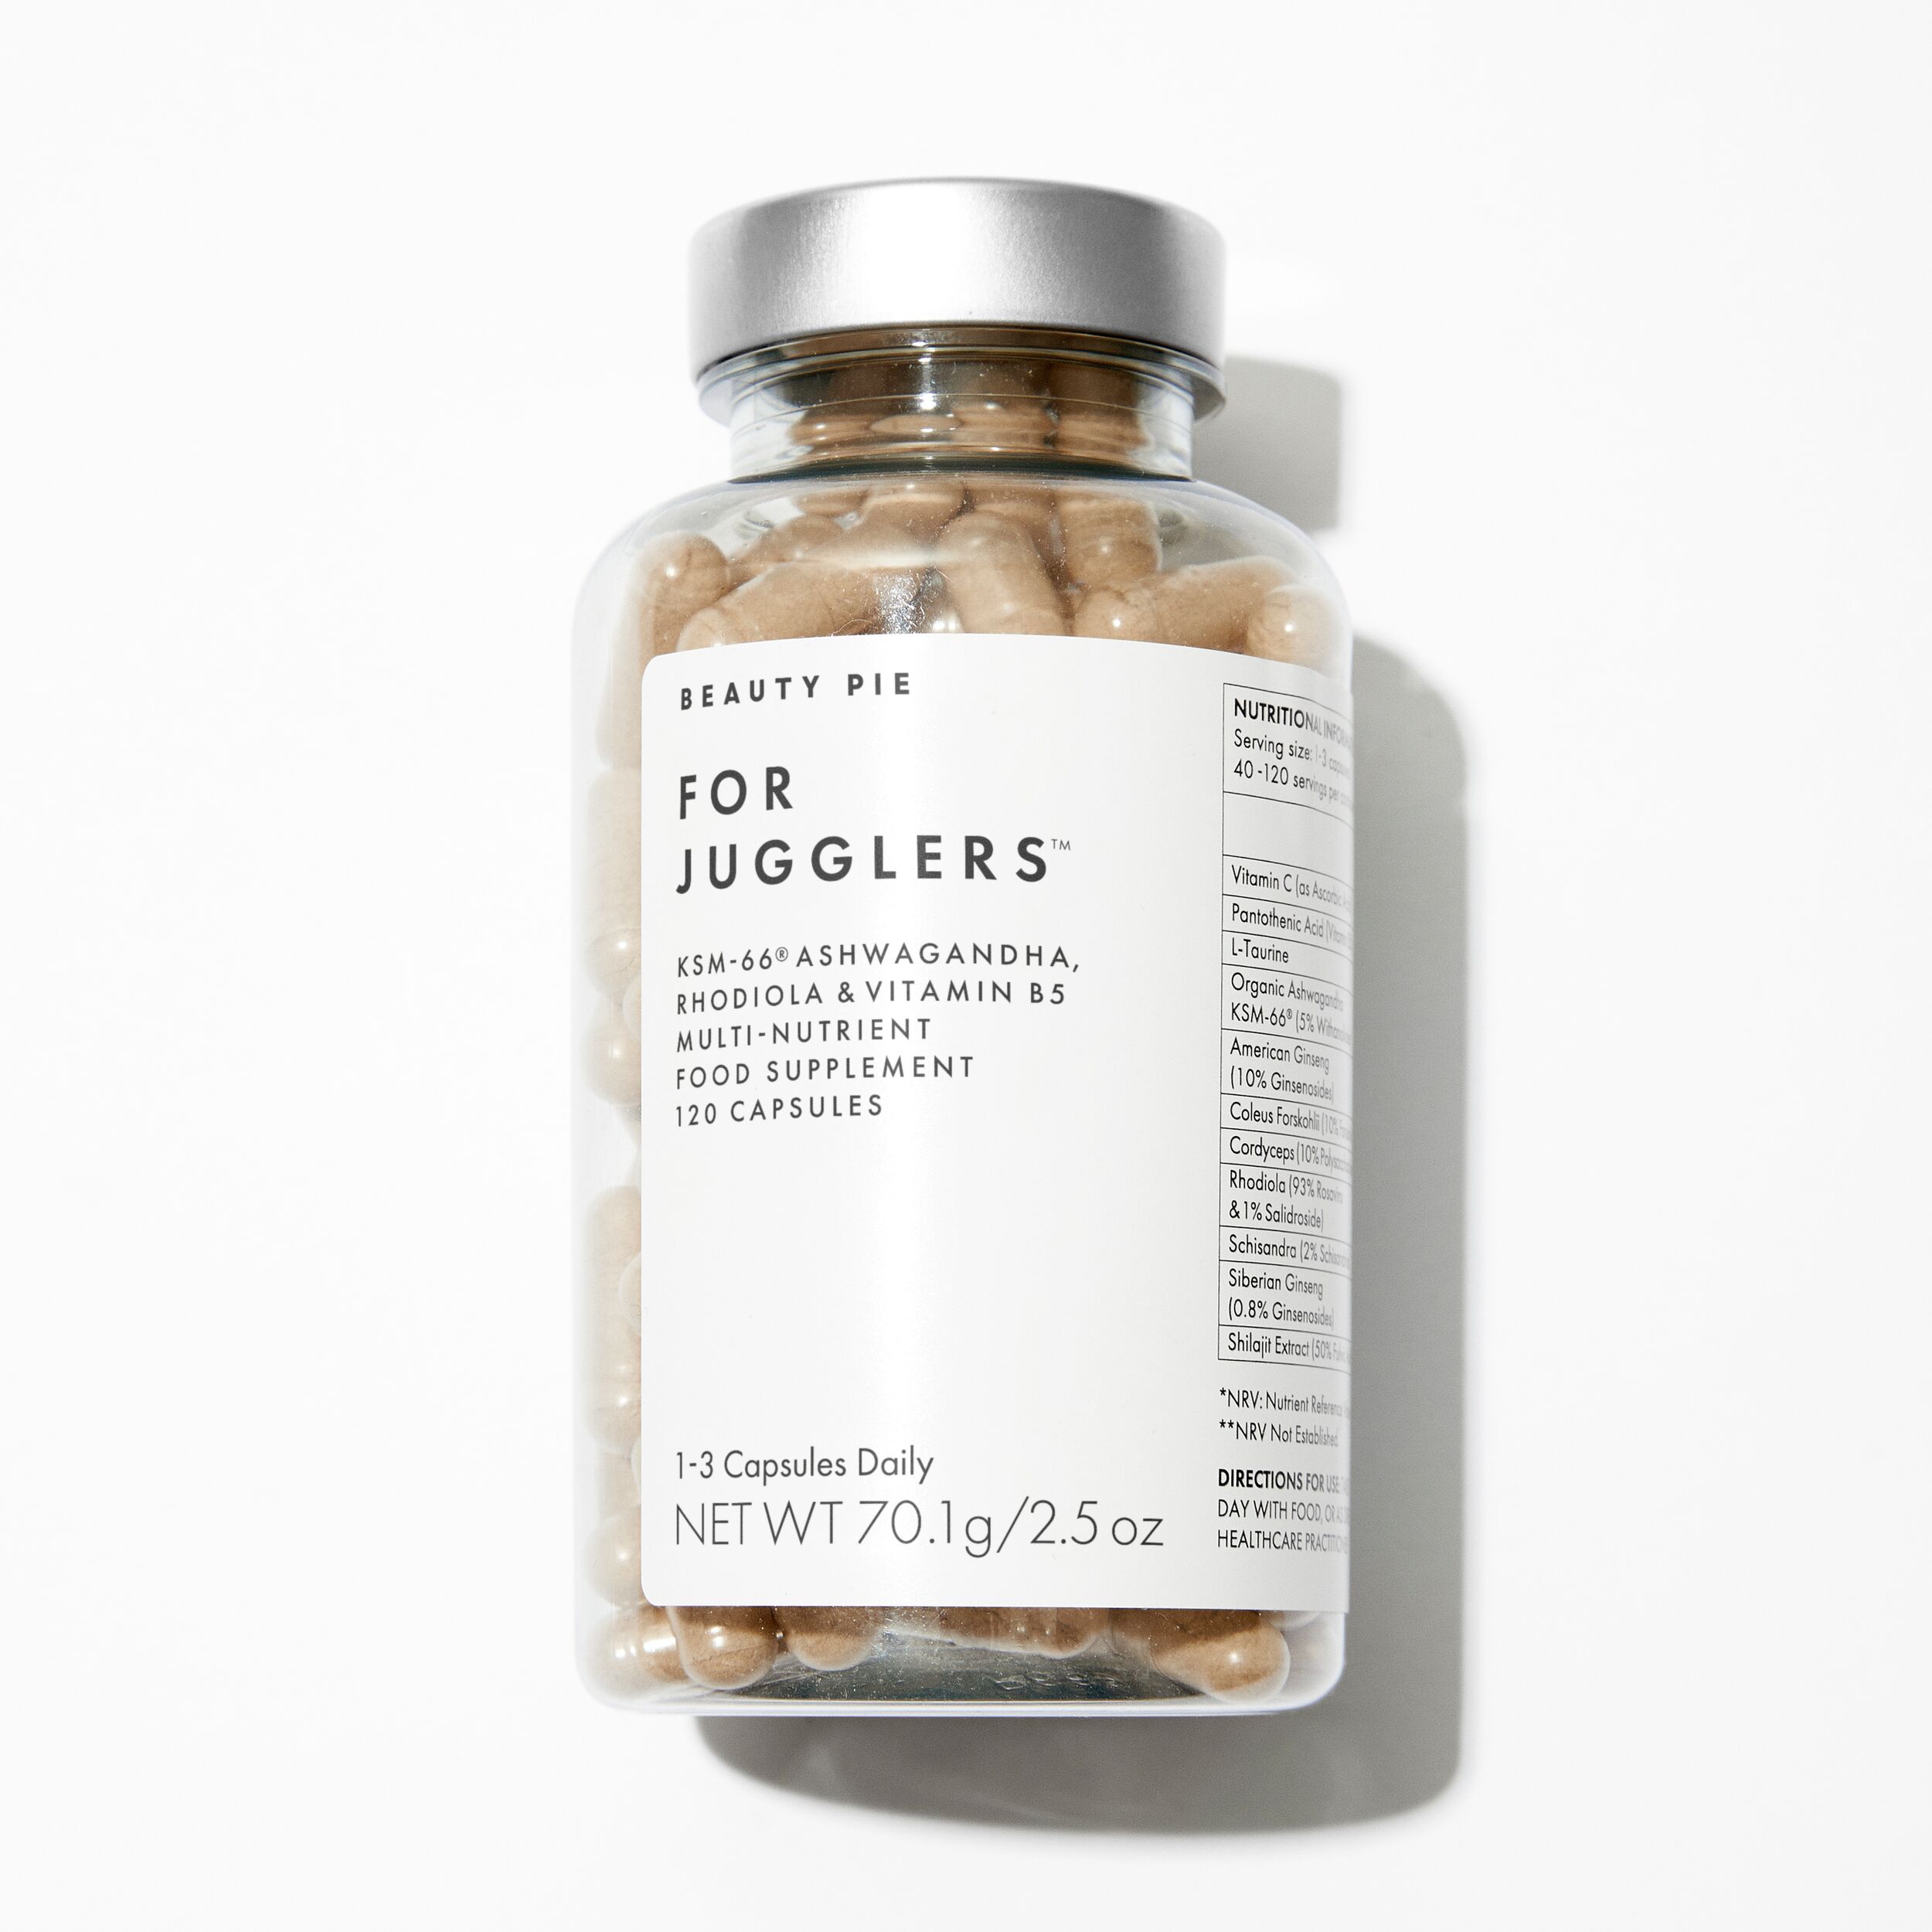 Beauty Pie For Jugglers Supplements